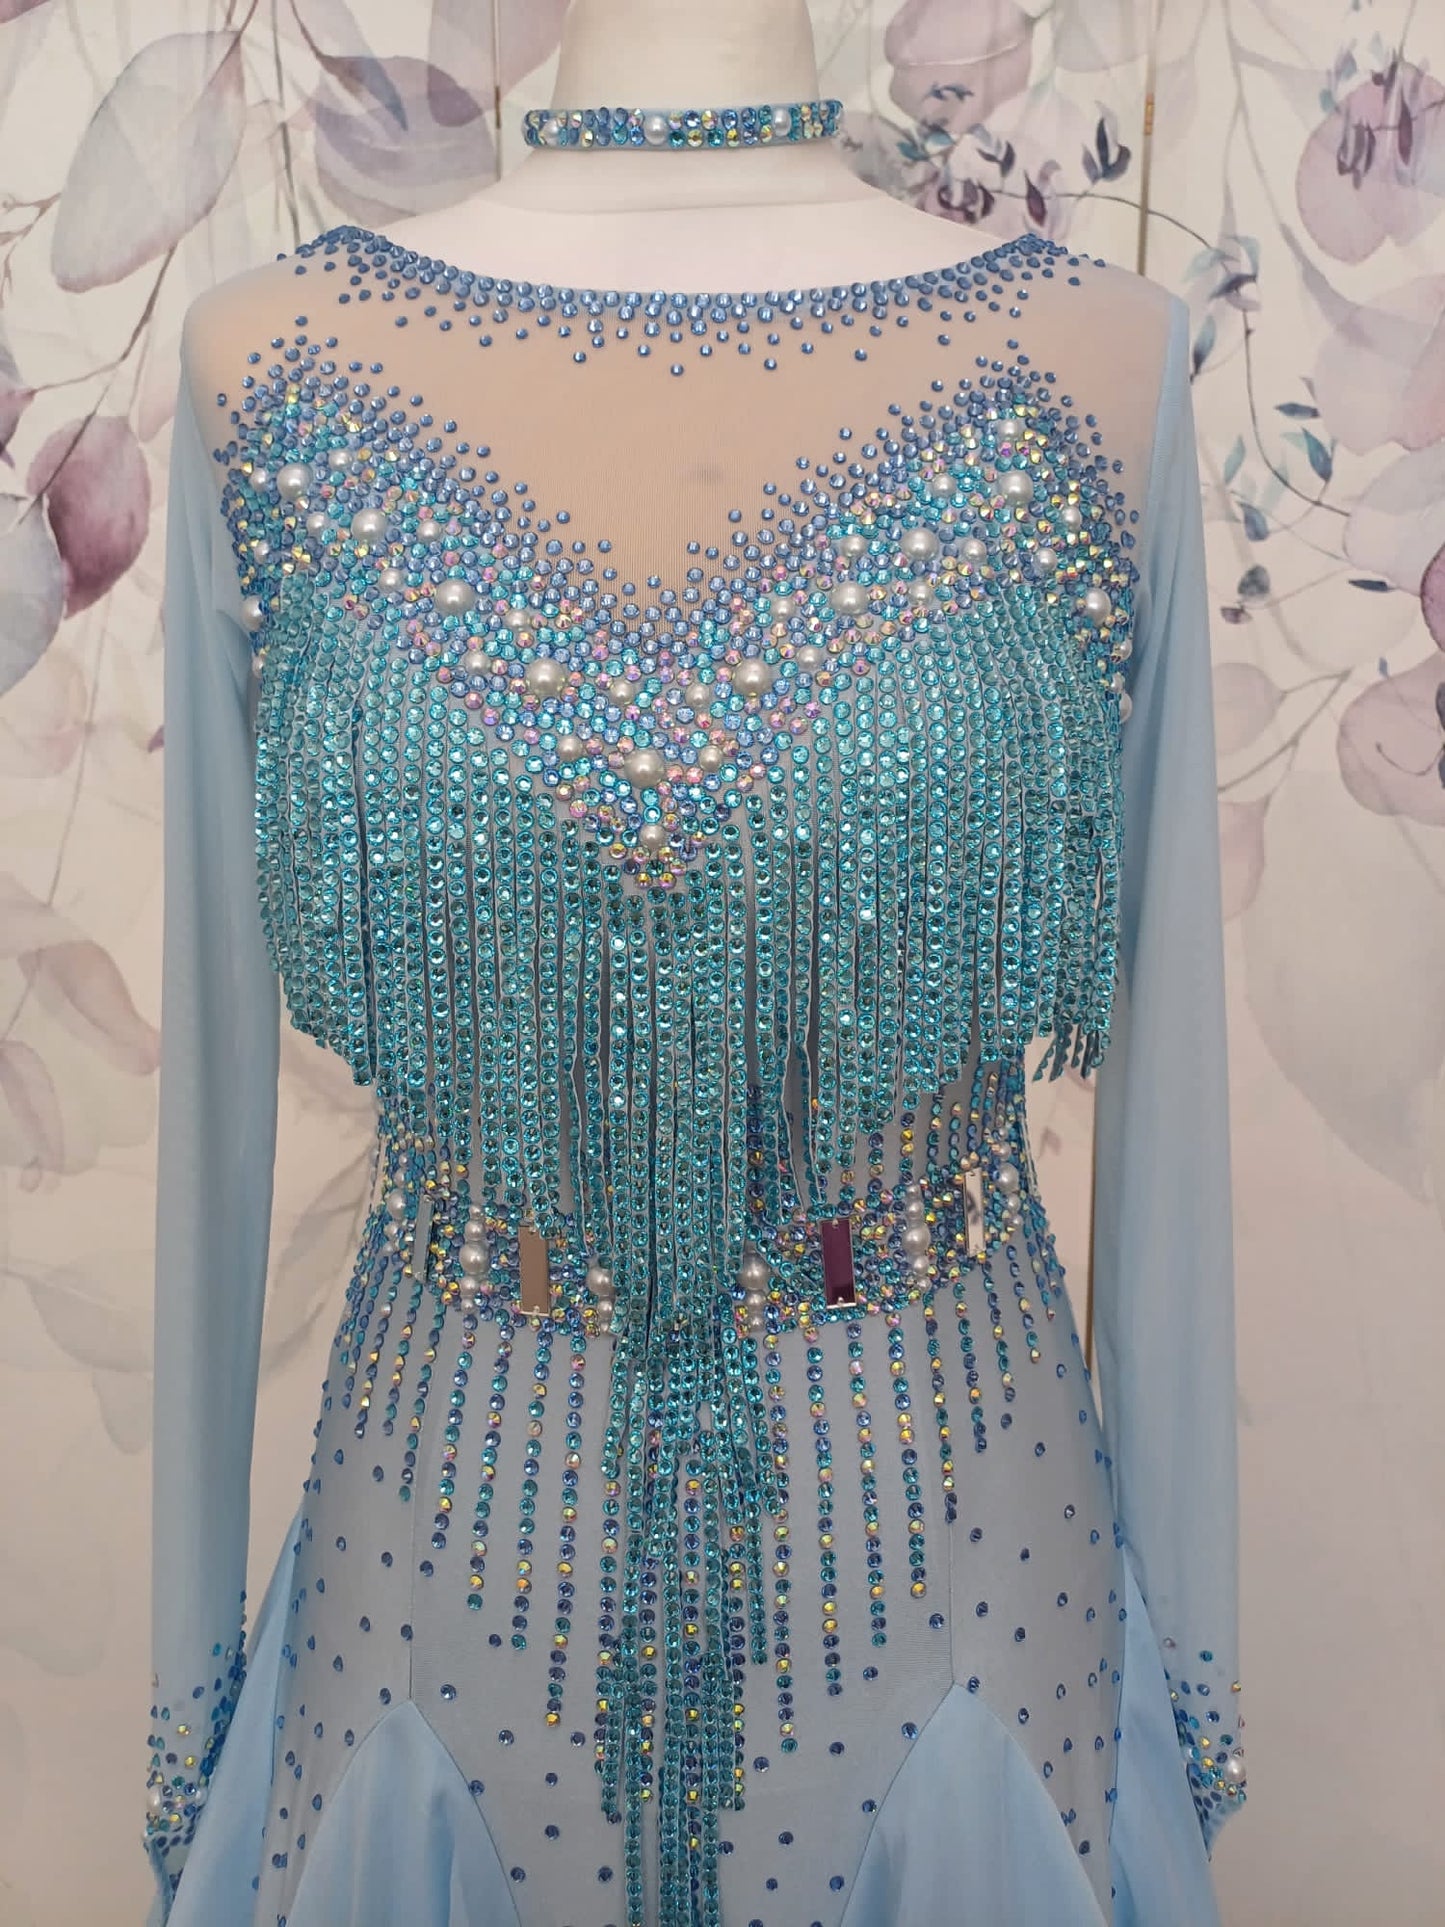 208 Baby Blue boat neck Ballroom Dress with flesh panel to the back. Stoned fringe detail to the chest area. Stoned waist detail to the front & back. Boat neck with flesh panel to the back. Decorated with AB, light sapphire & sapphire stones